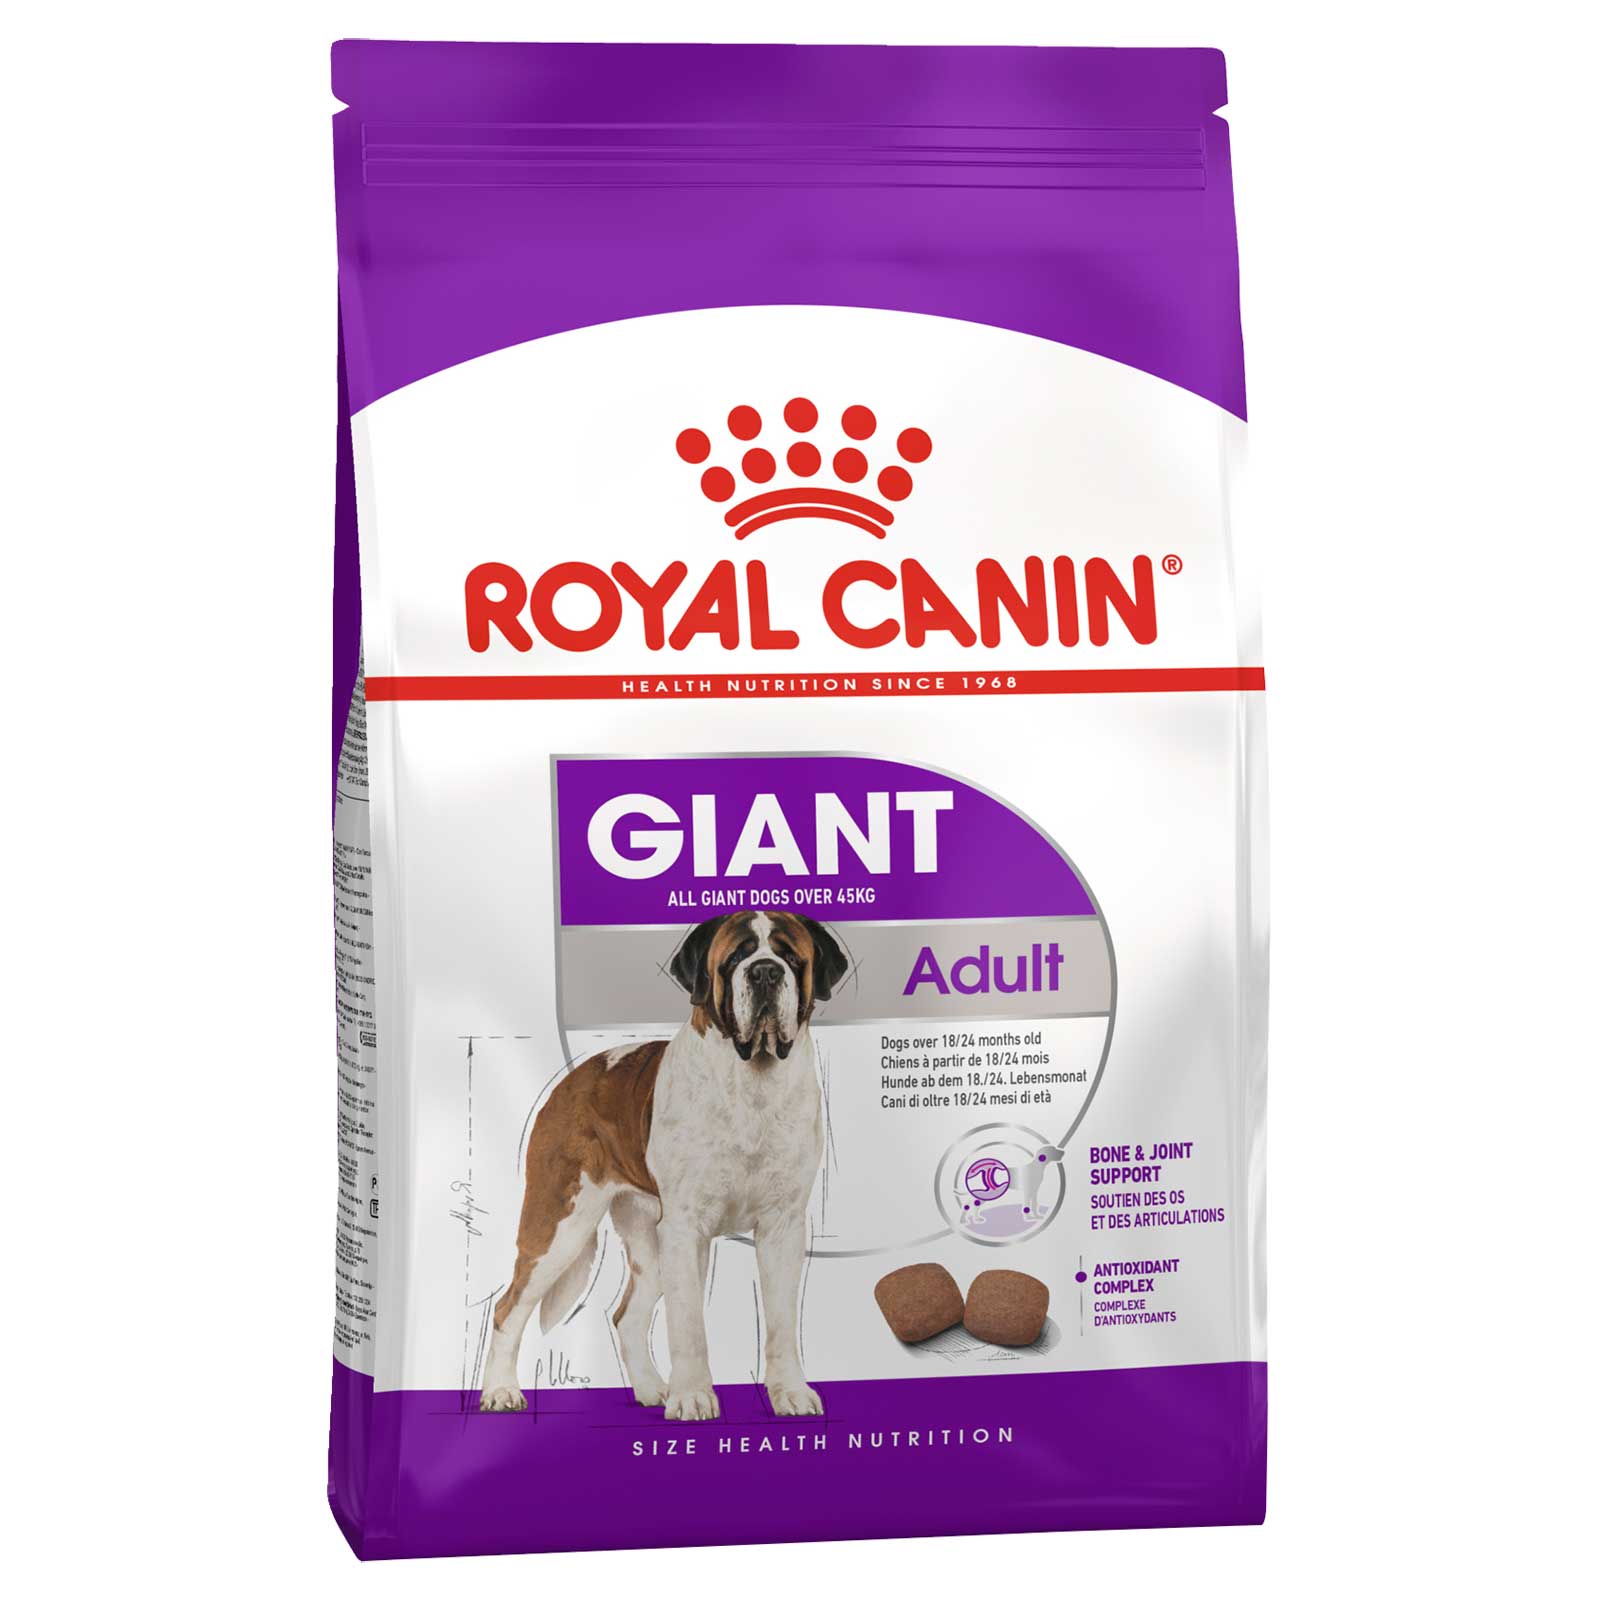 Royal Canin Dog Food Adult Giant Breed